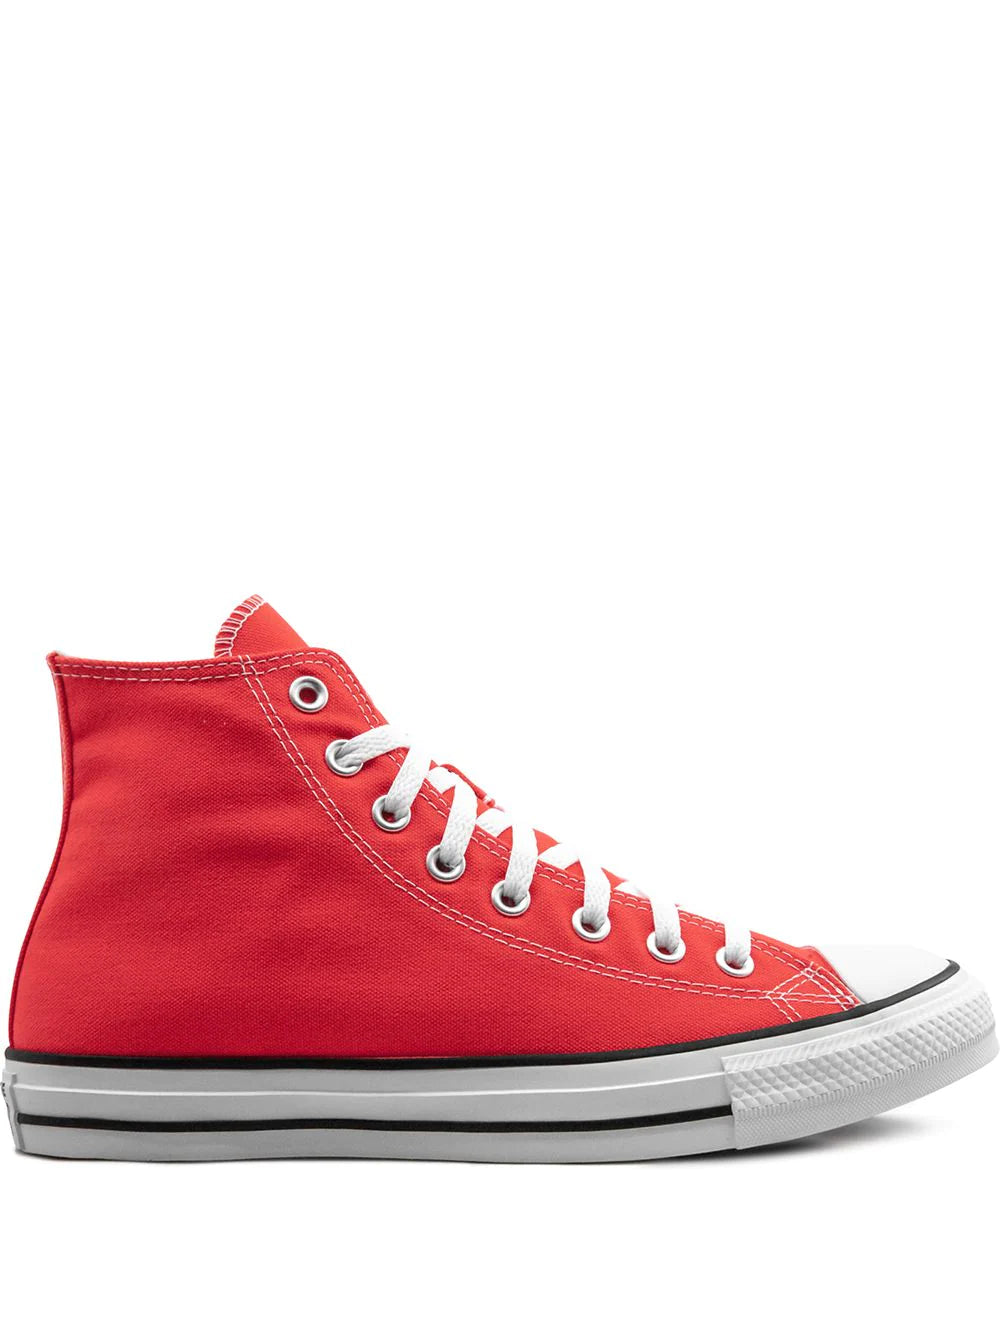 CONVERSE CHUCK TAYLOR CLASSIC - ROUGE